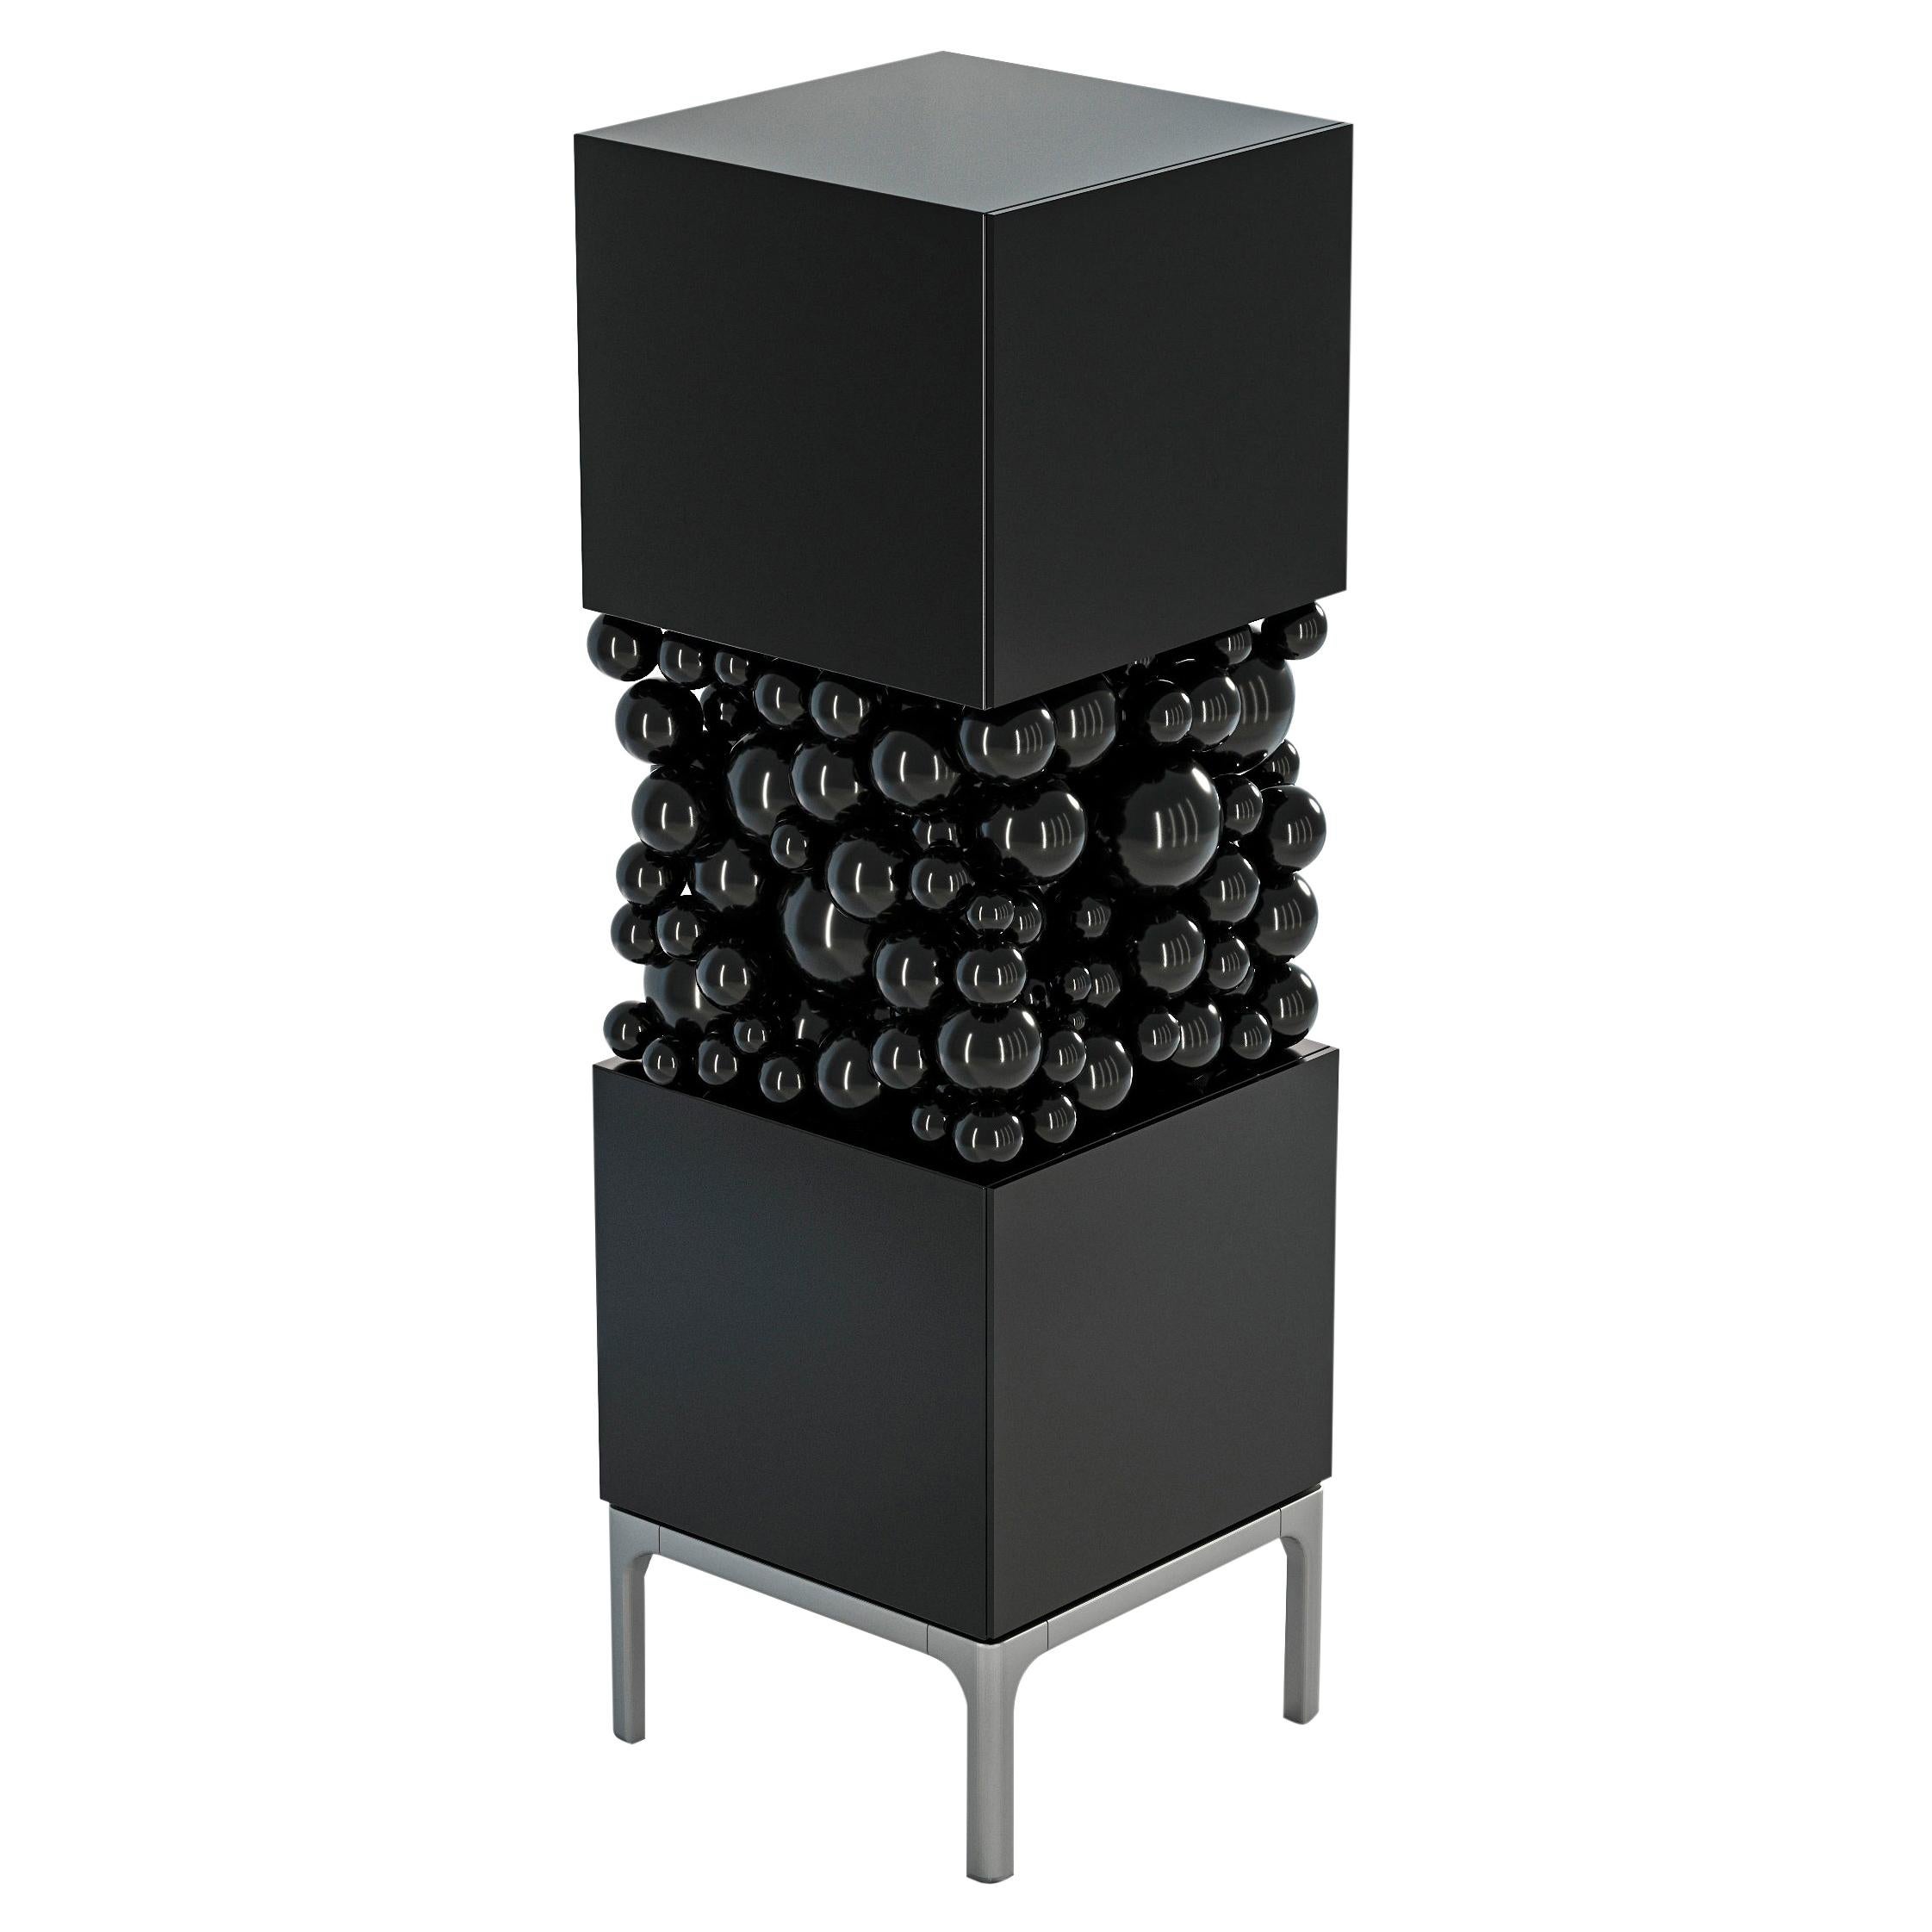 Metal and Plywood Black Cabinet, Bubbles Collection, Amazing Emotional Design